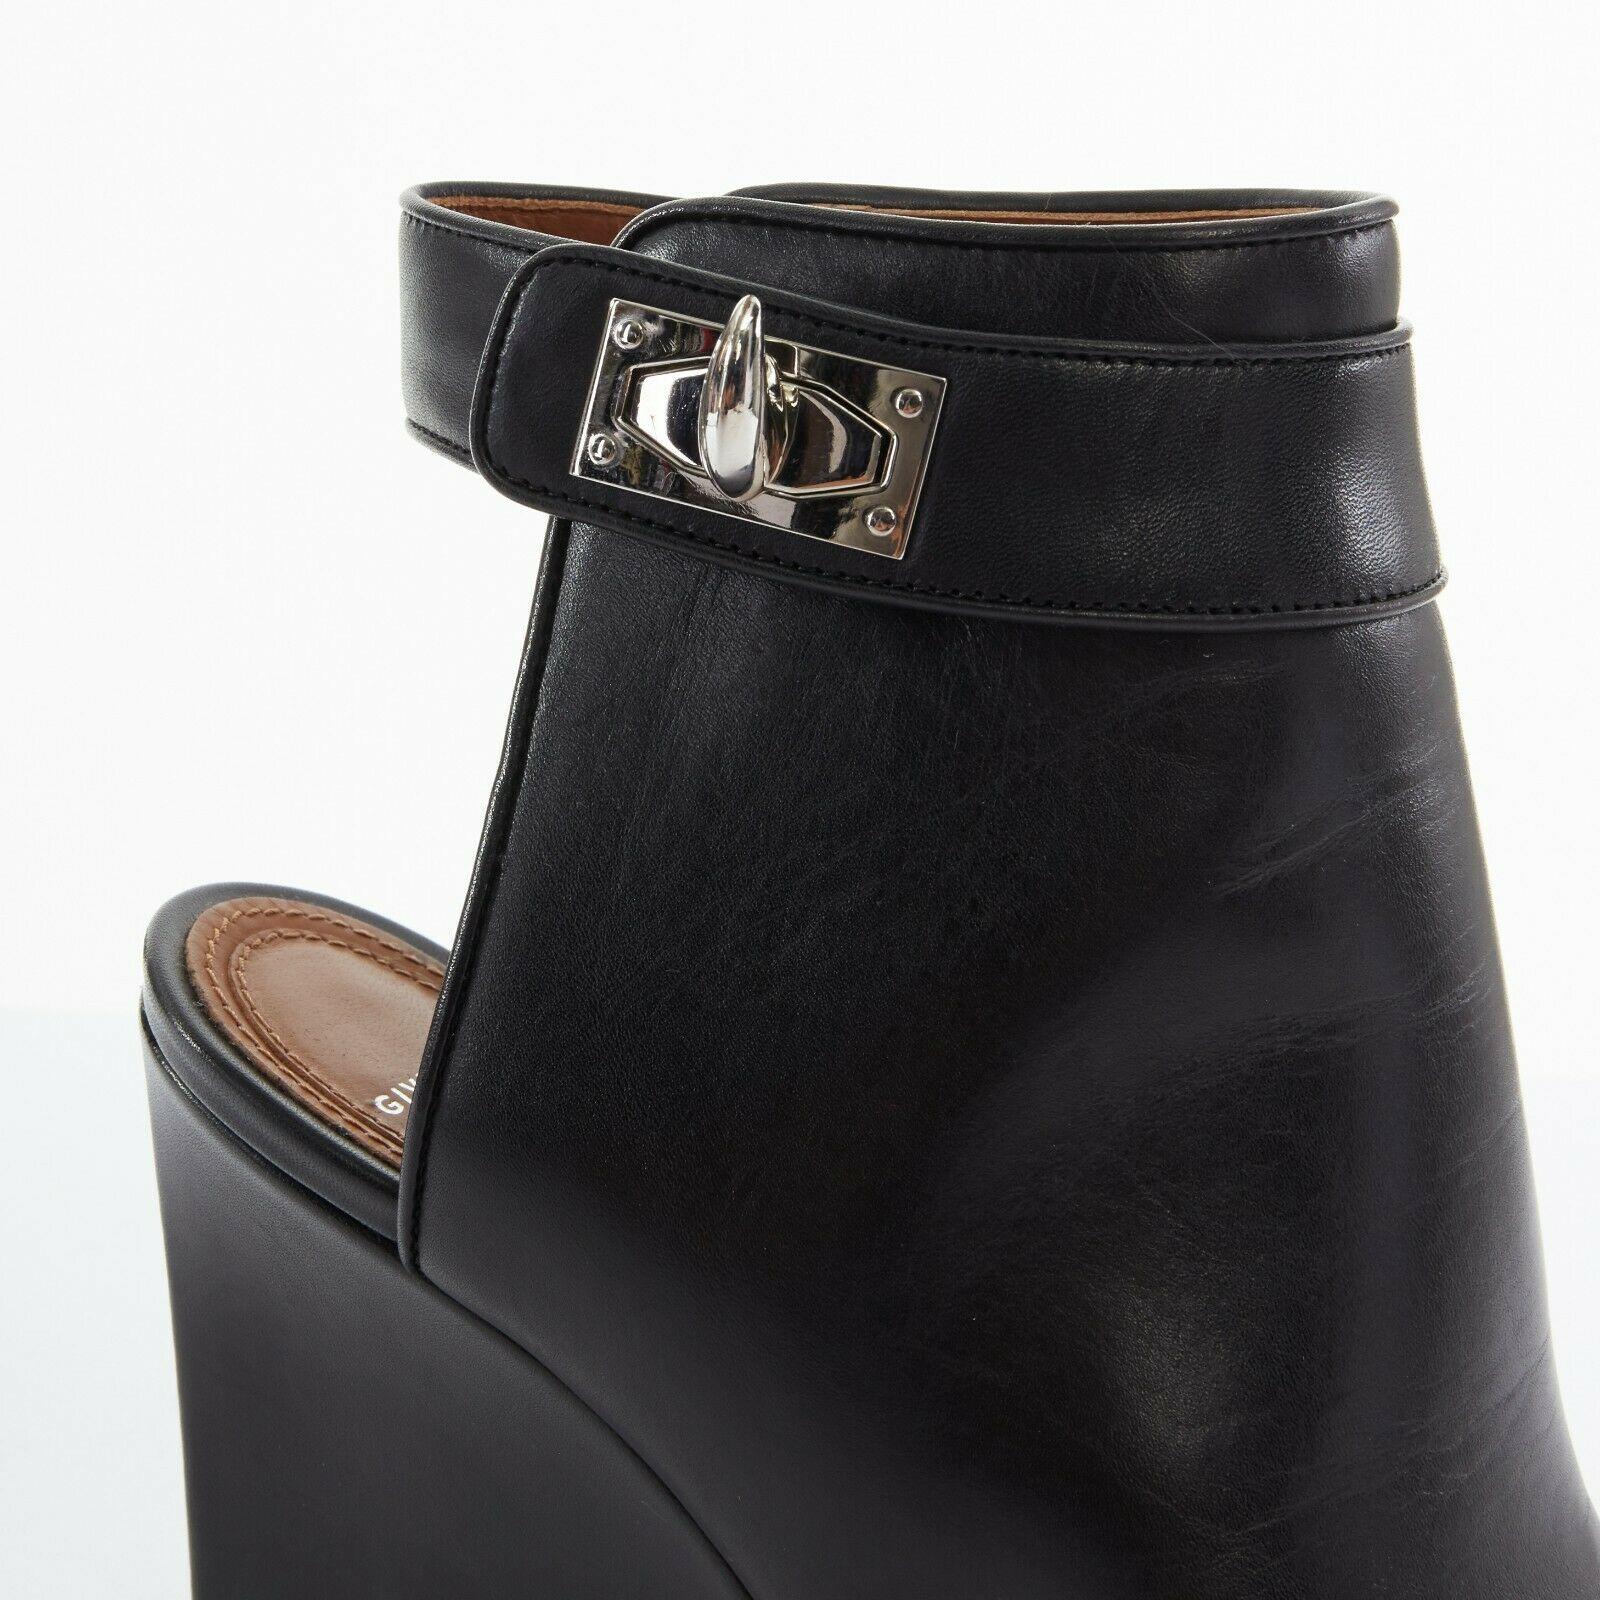 GIVENCHY TISCI black leather sharktooth turn lock mule ankle bootie wedge EU37.5 4